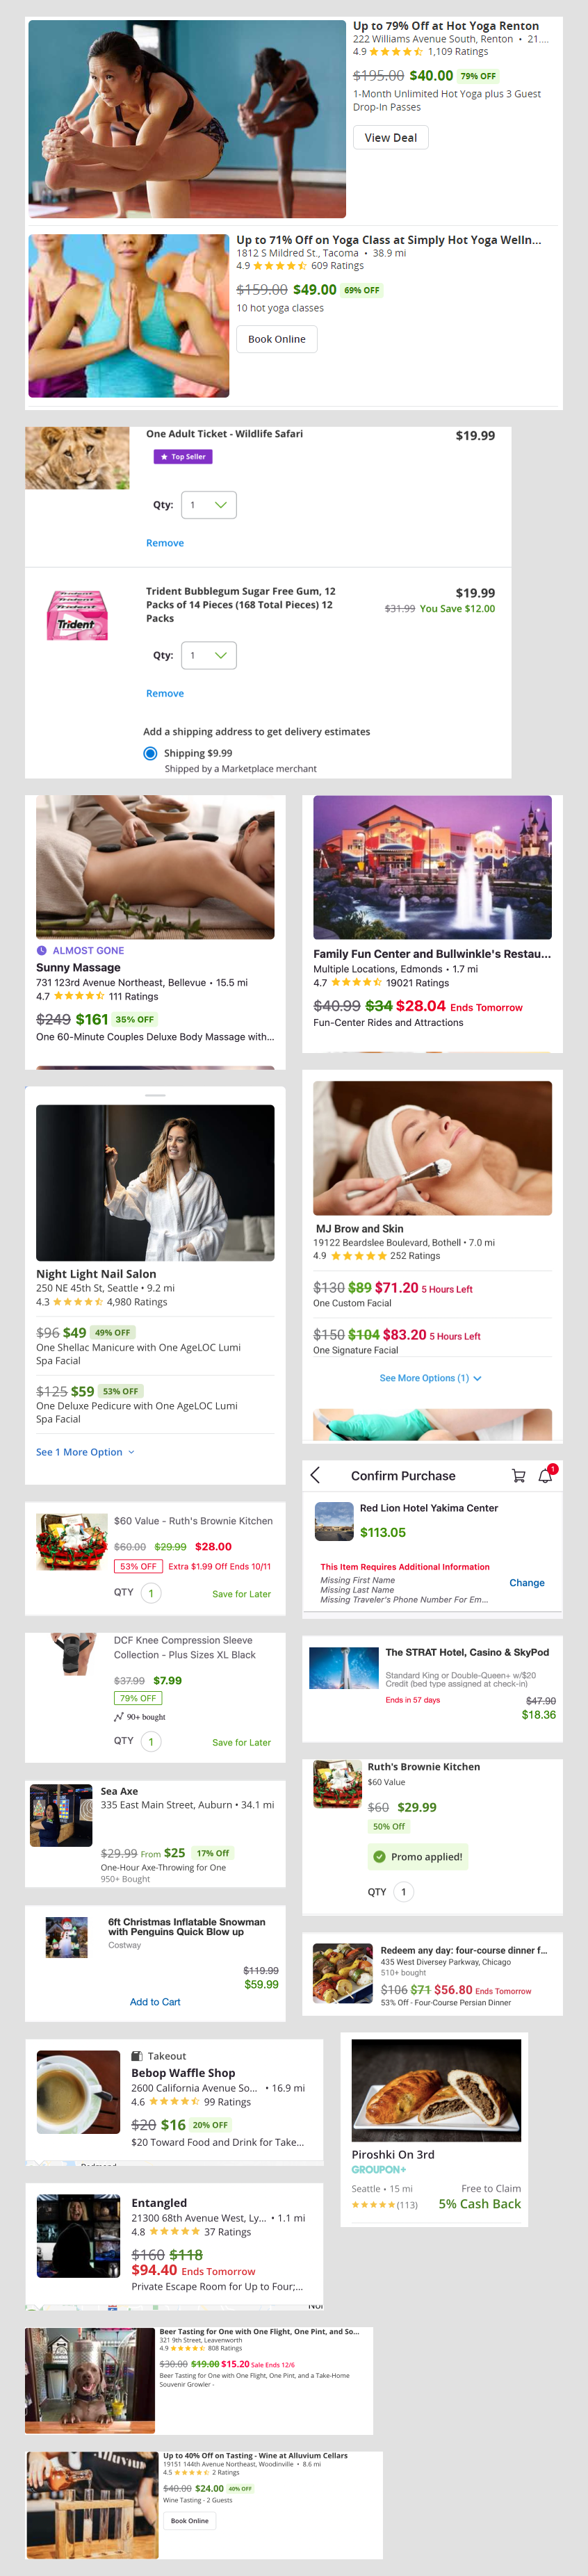 various card examples from the Groupon website